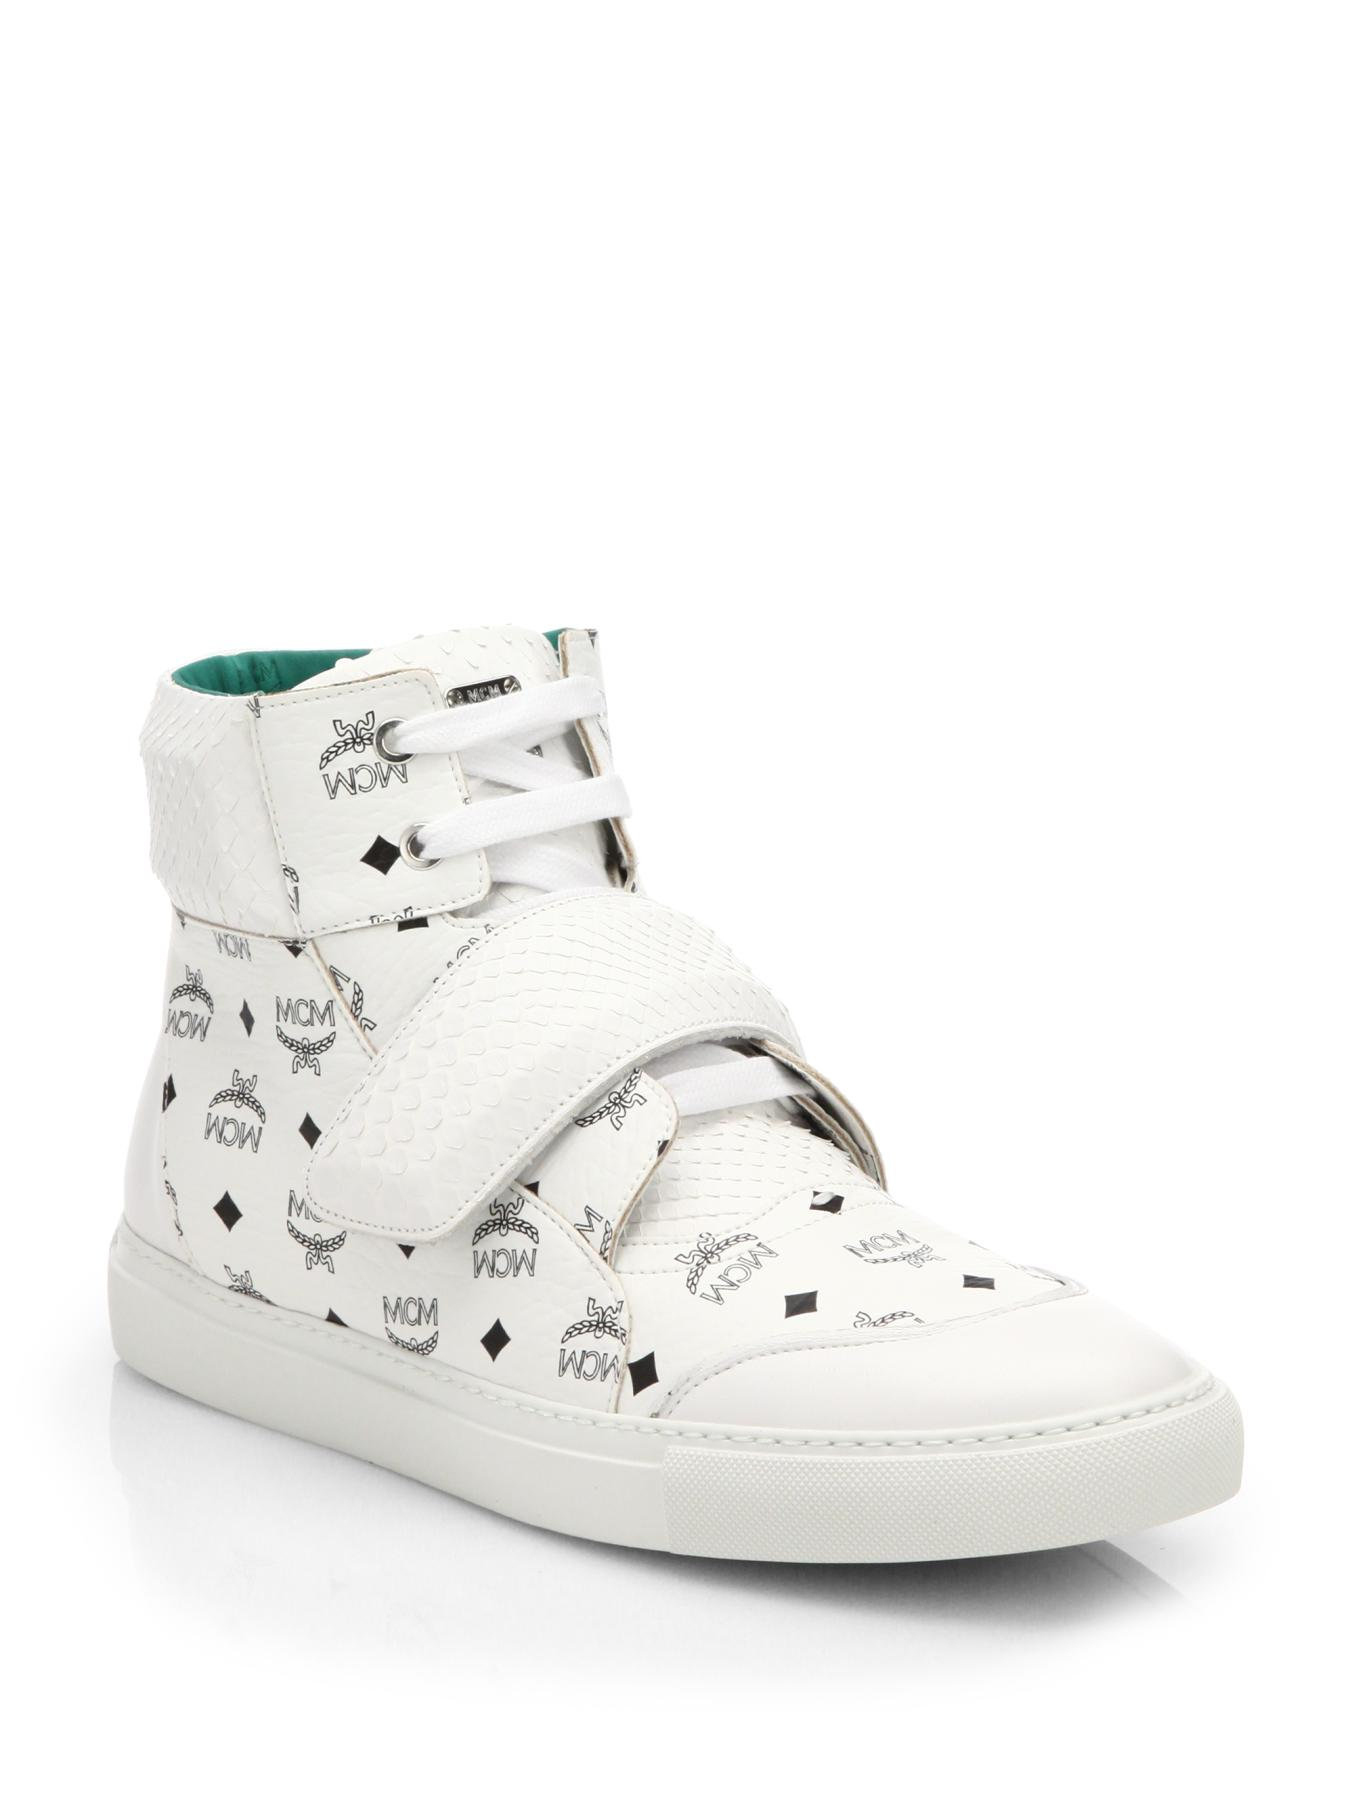 Lyst - Mcm Python-strap High-top Sneakers in White for Men